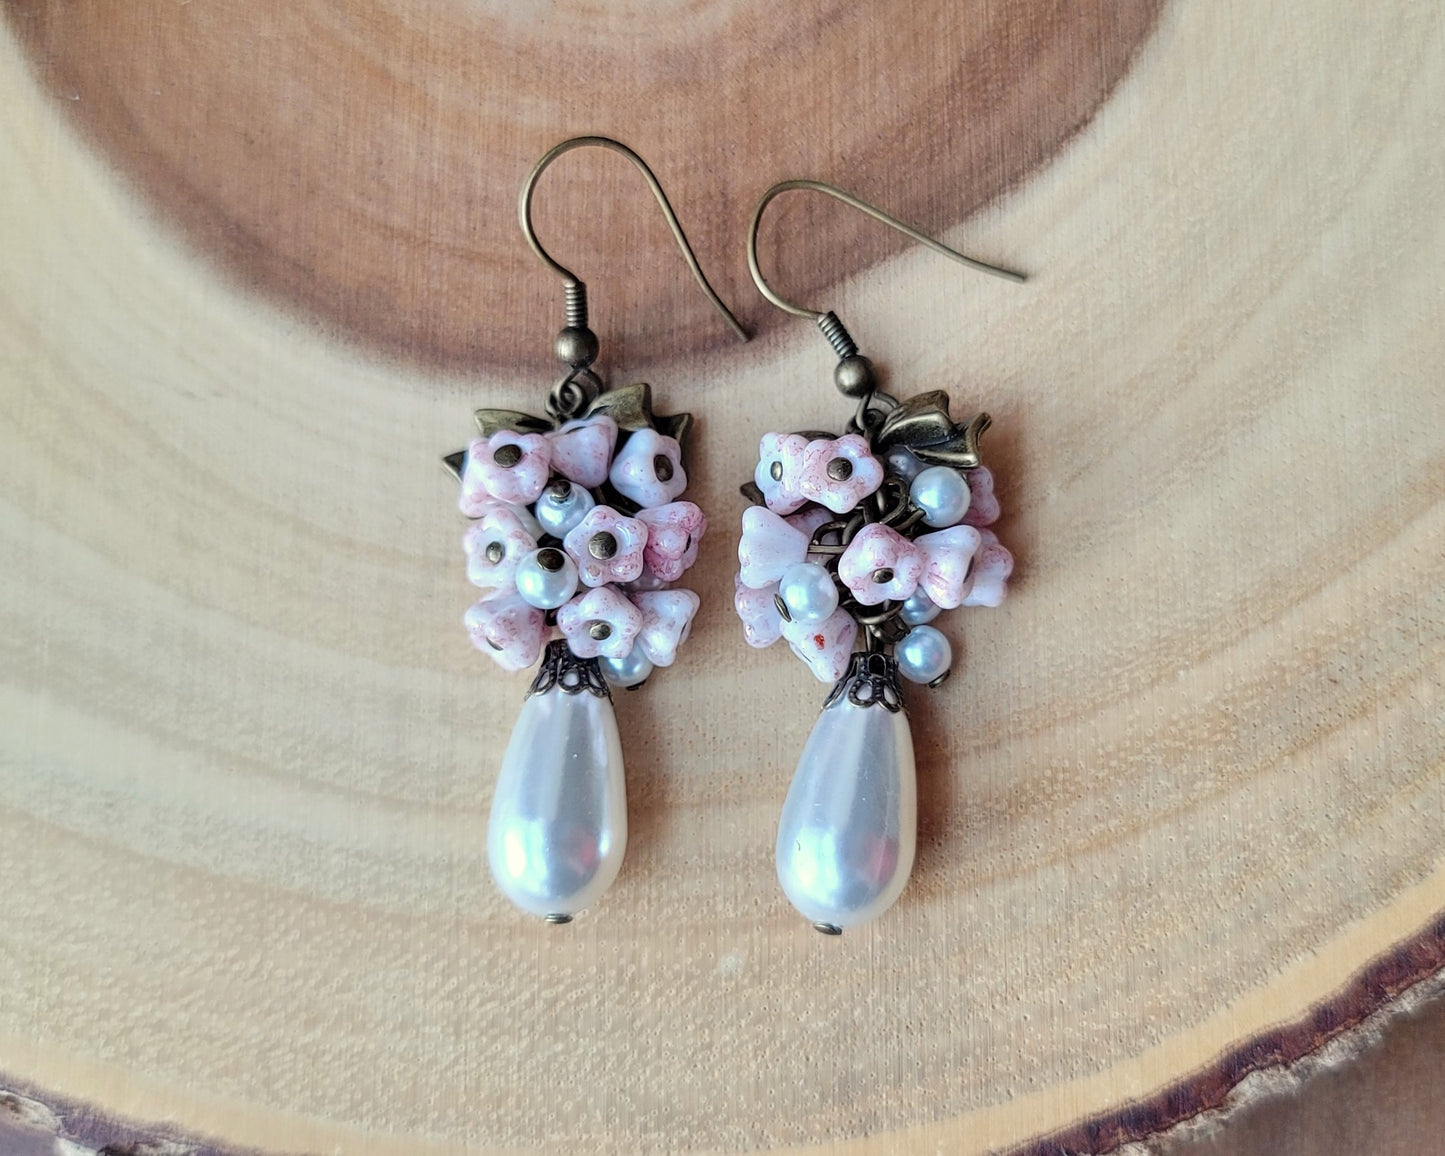 Vintage Romance White Pearl Pale Pink Flower Bow Earrings, Long Cluster earrings made with white Faux pearls and pale pink Czech flowers and Antiqued Brass finished metal.  Photo on wood background